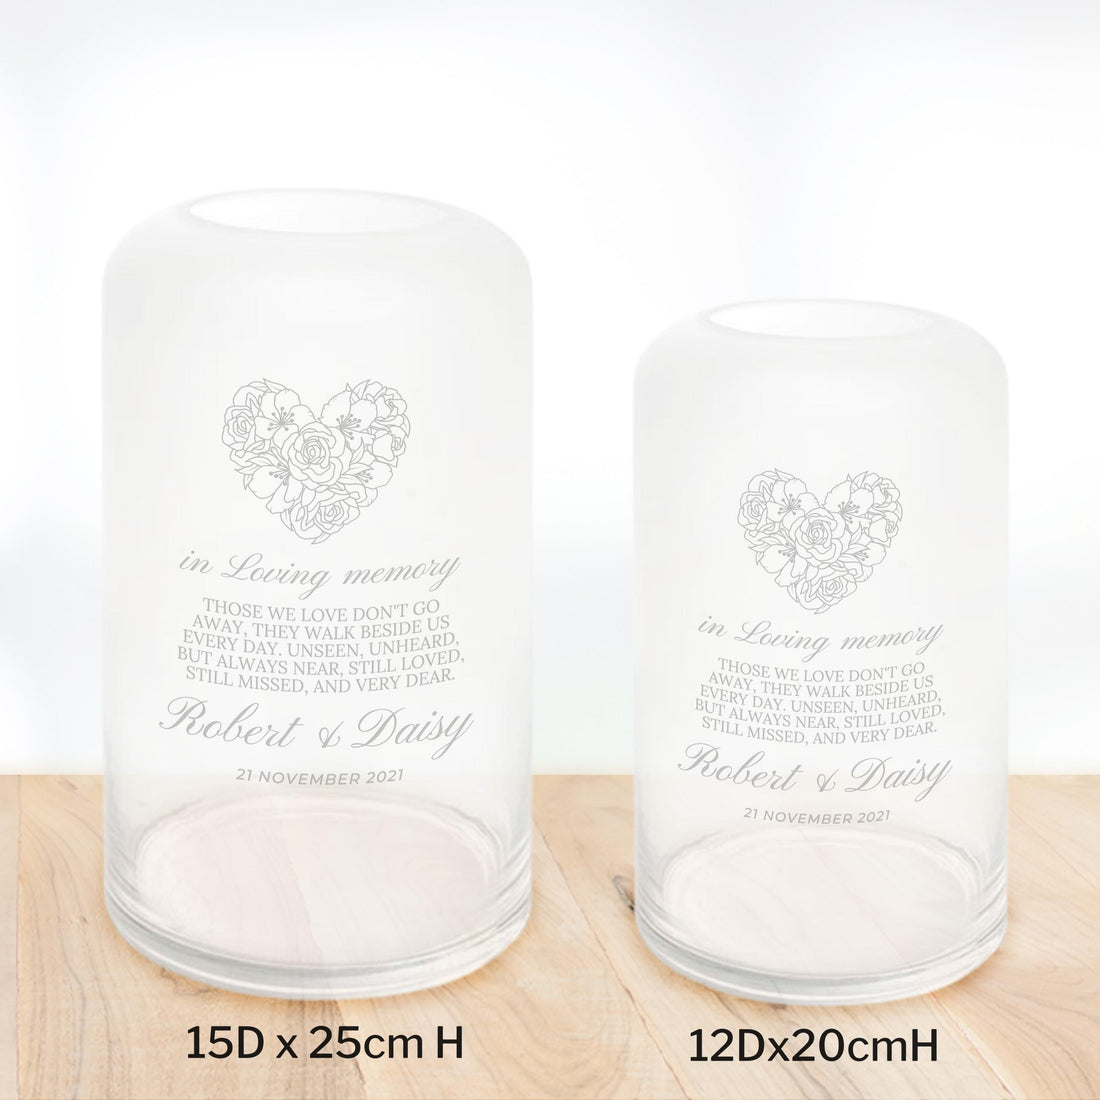 Personalised Medium Curved Cylinder Frosted Clear Glass Vase, Custom Engraved Memorial Wedding Gift for Bridesmaid, Mother of Bride/ Groom, Housewarming, Anniversary